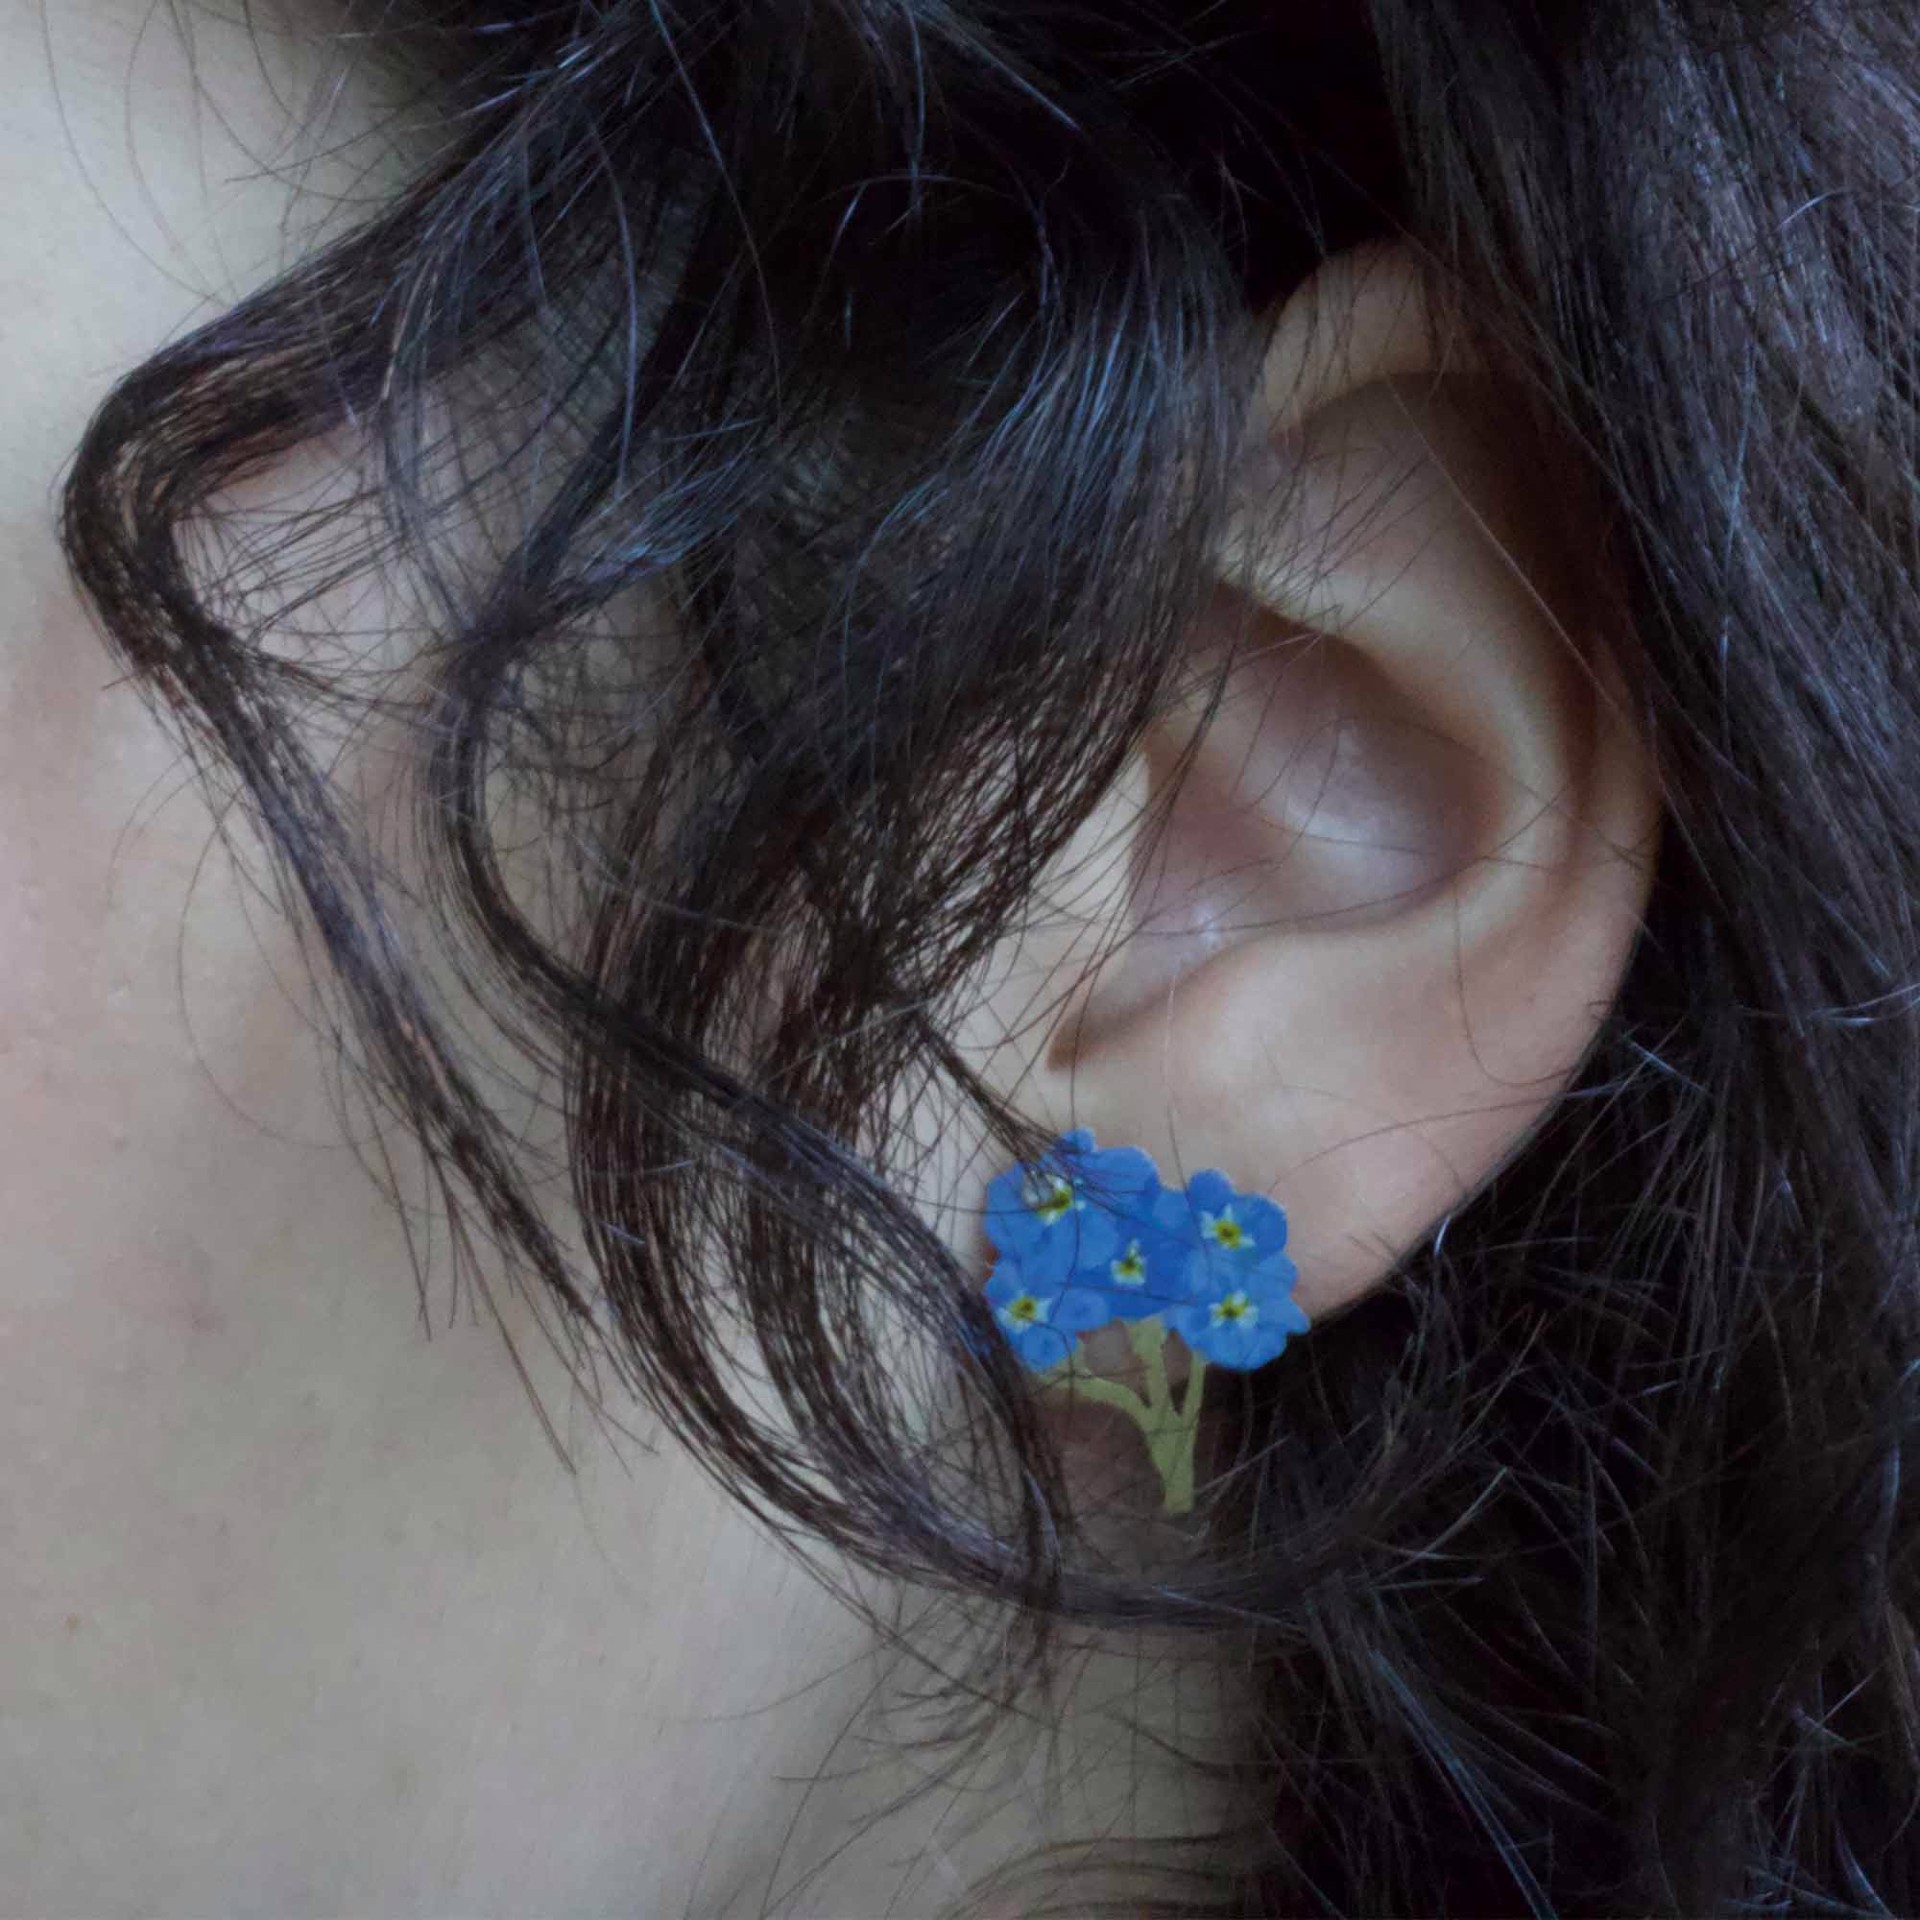 Forget-Me-Not Earrings by Christopher Thompson Royds